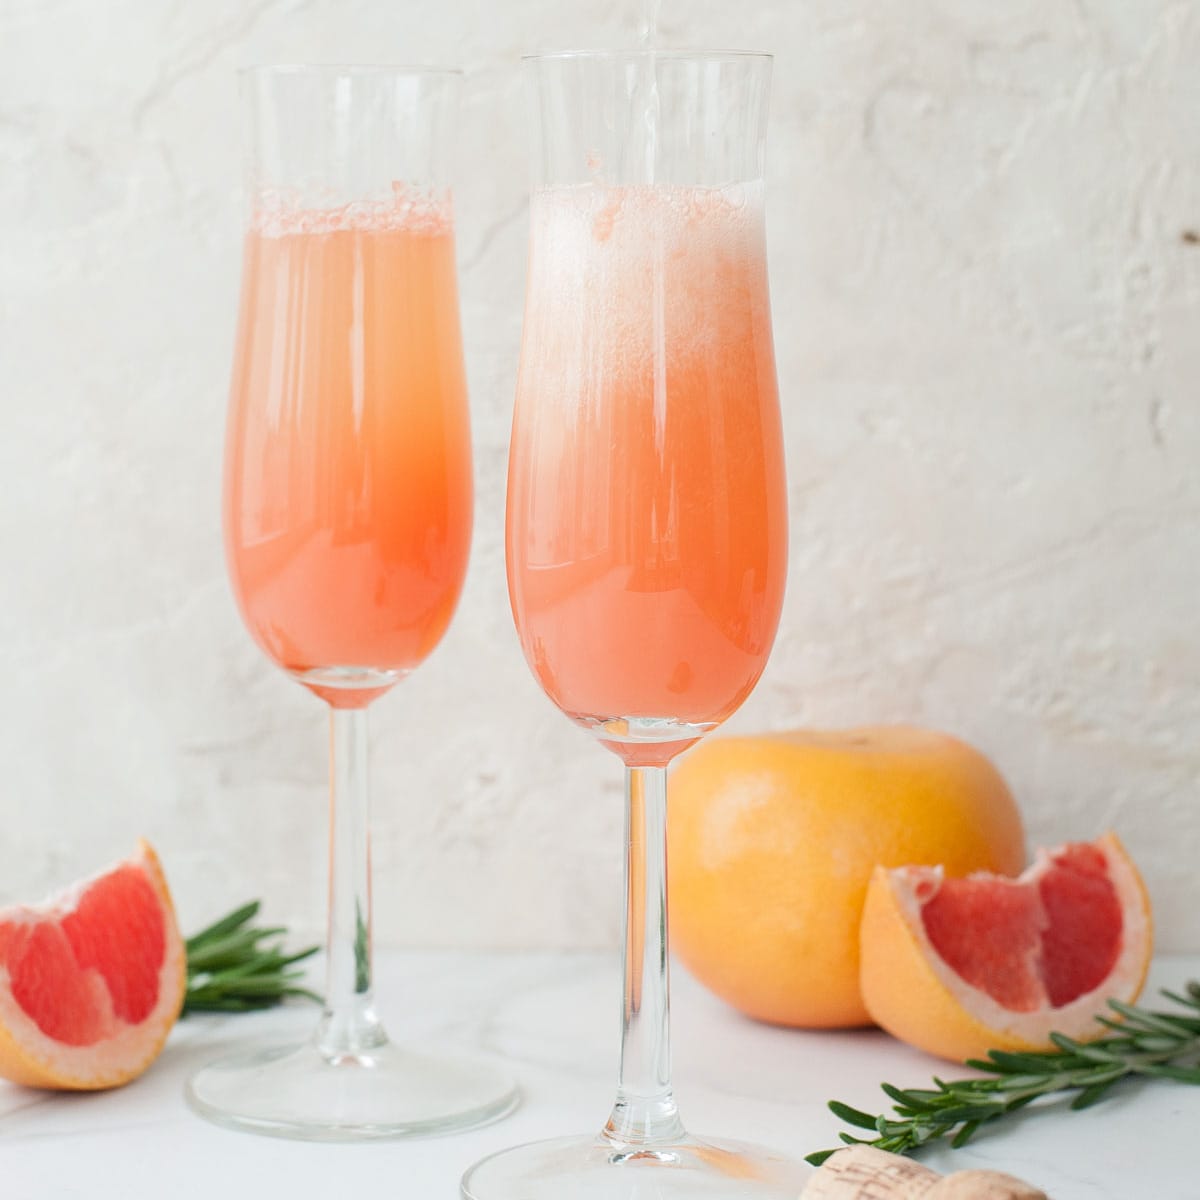 Grapefruit mimosa in champagne glasses.